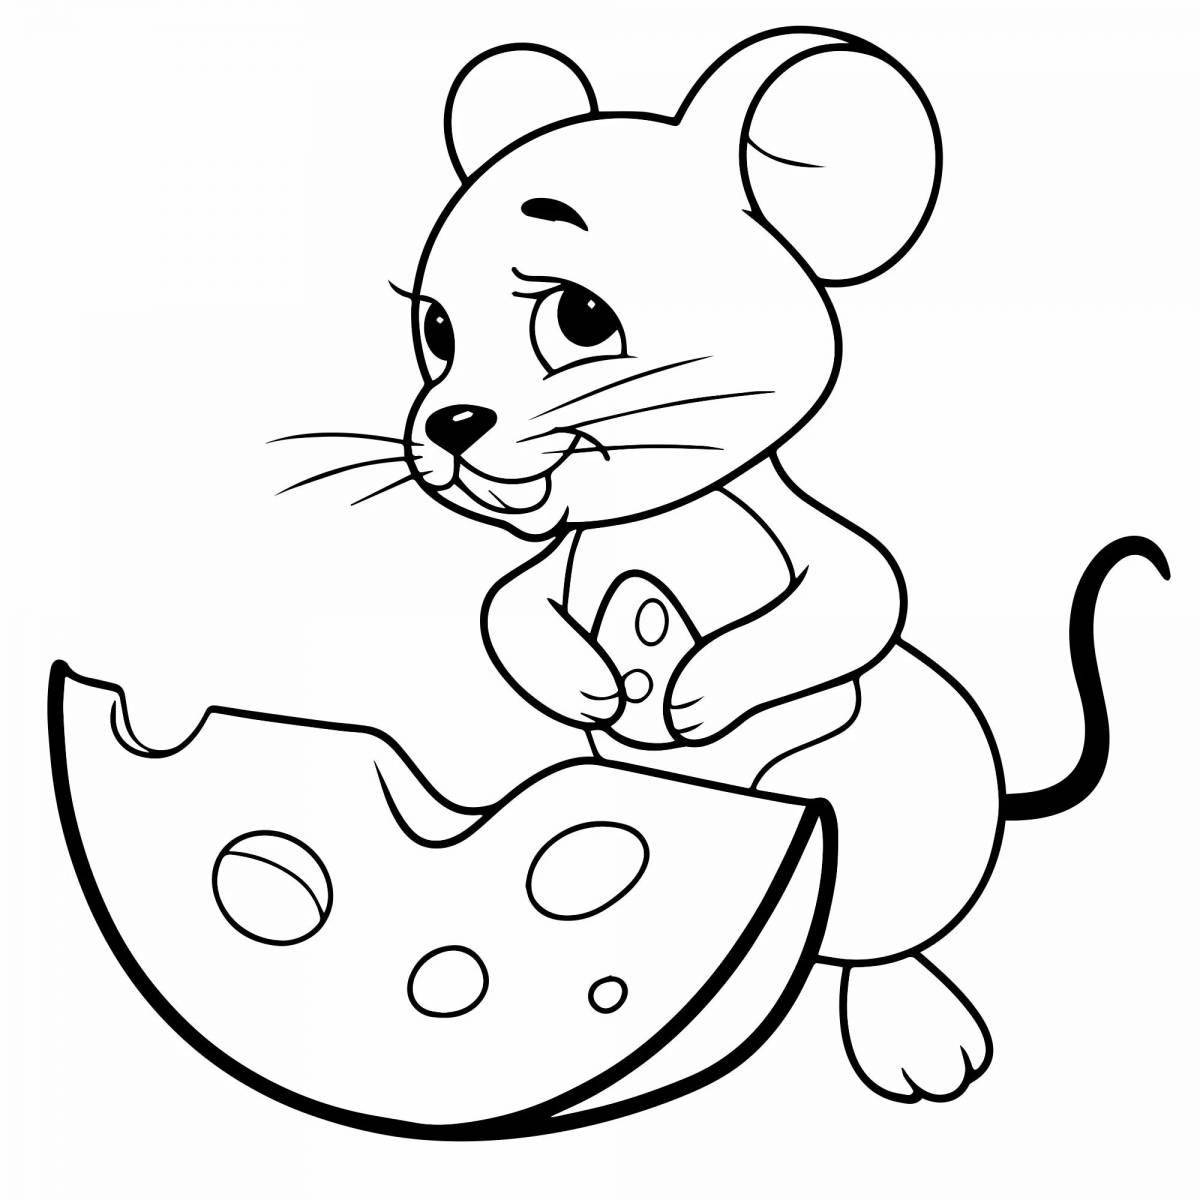 Playful mouse coloring book for 3-4 year olds